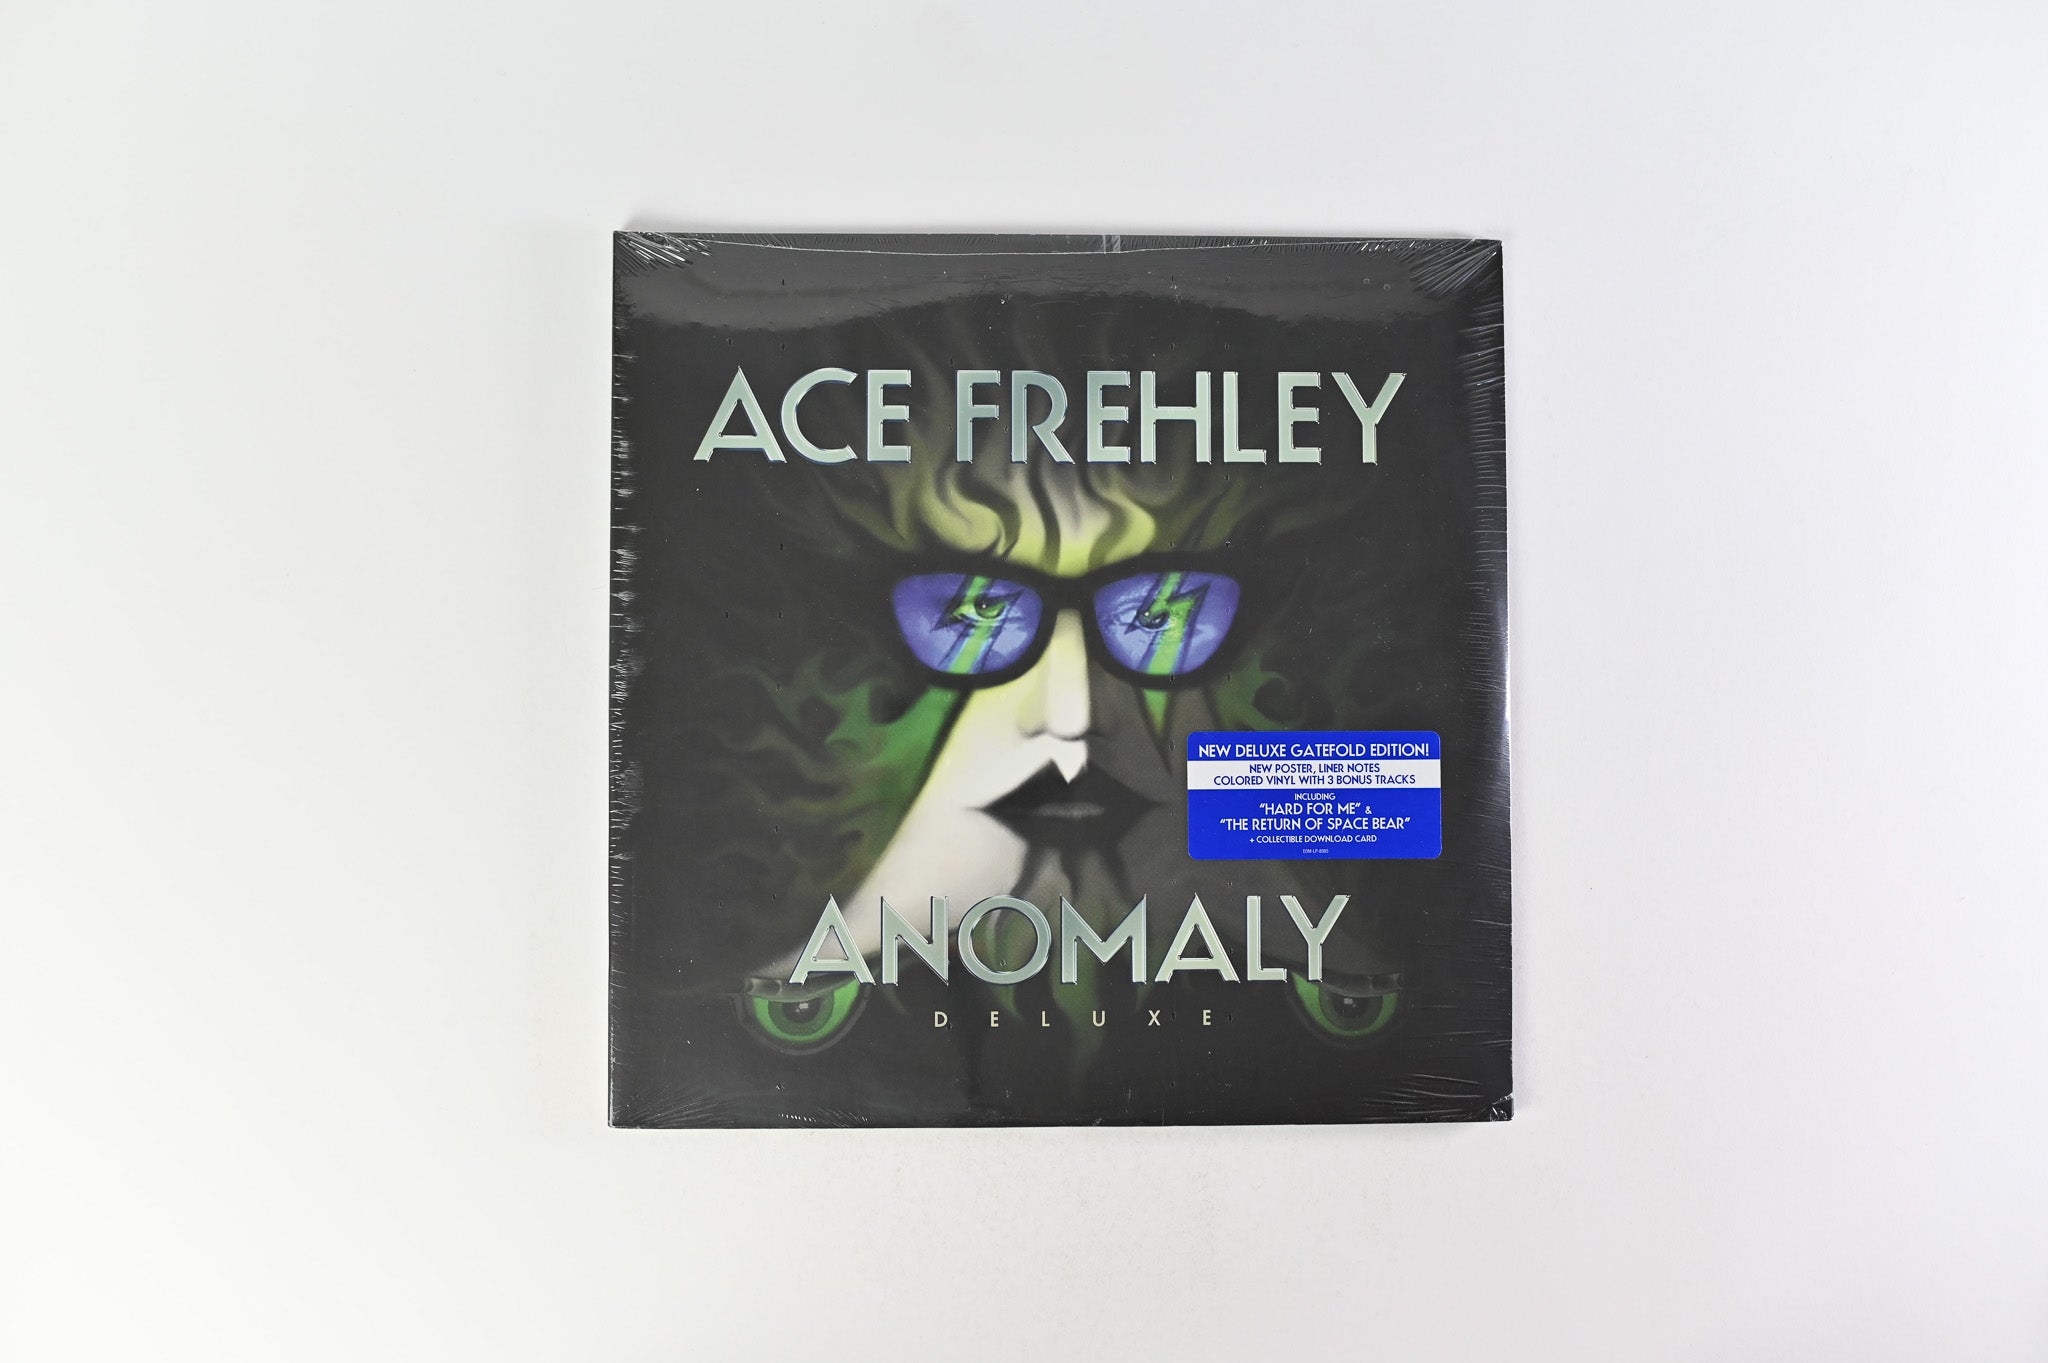 Ace Frehley - Anomaly - Deluxe SEALED on Entertainment One Starburst Vinyl